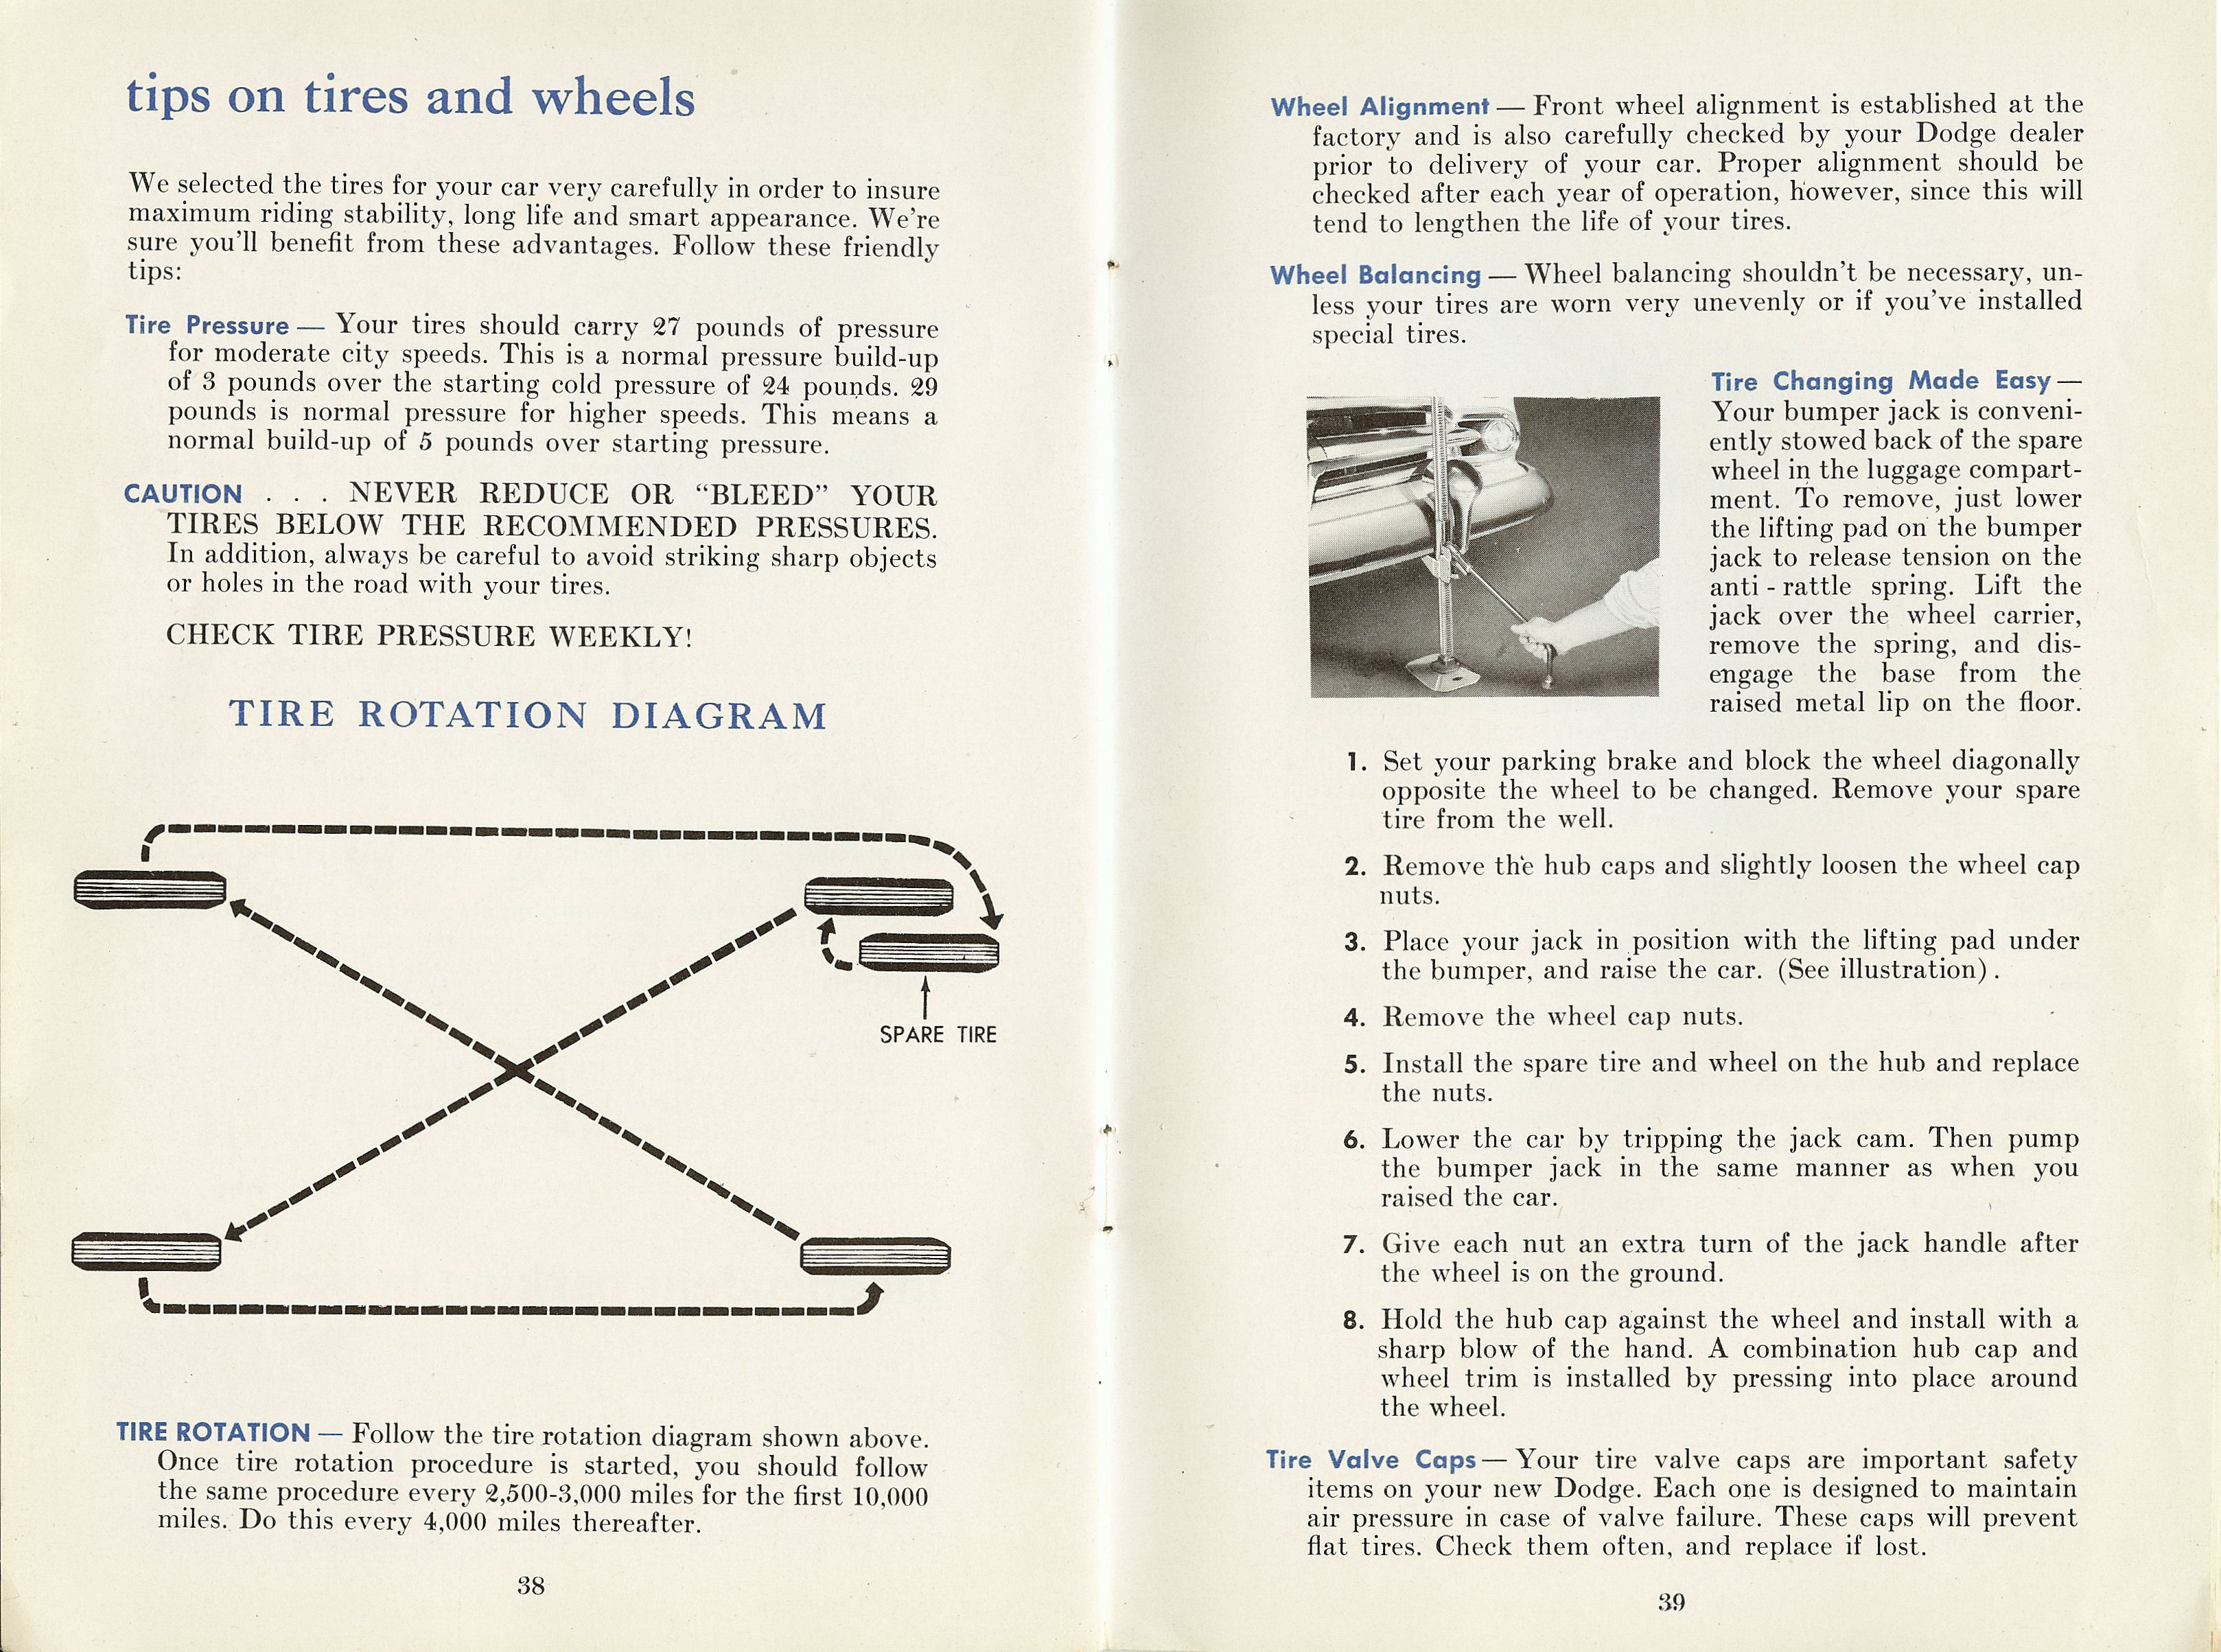 1954 Dodge Car Owners Manual Page 7